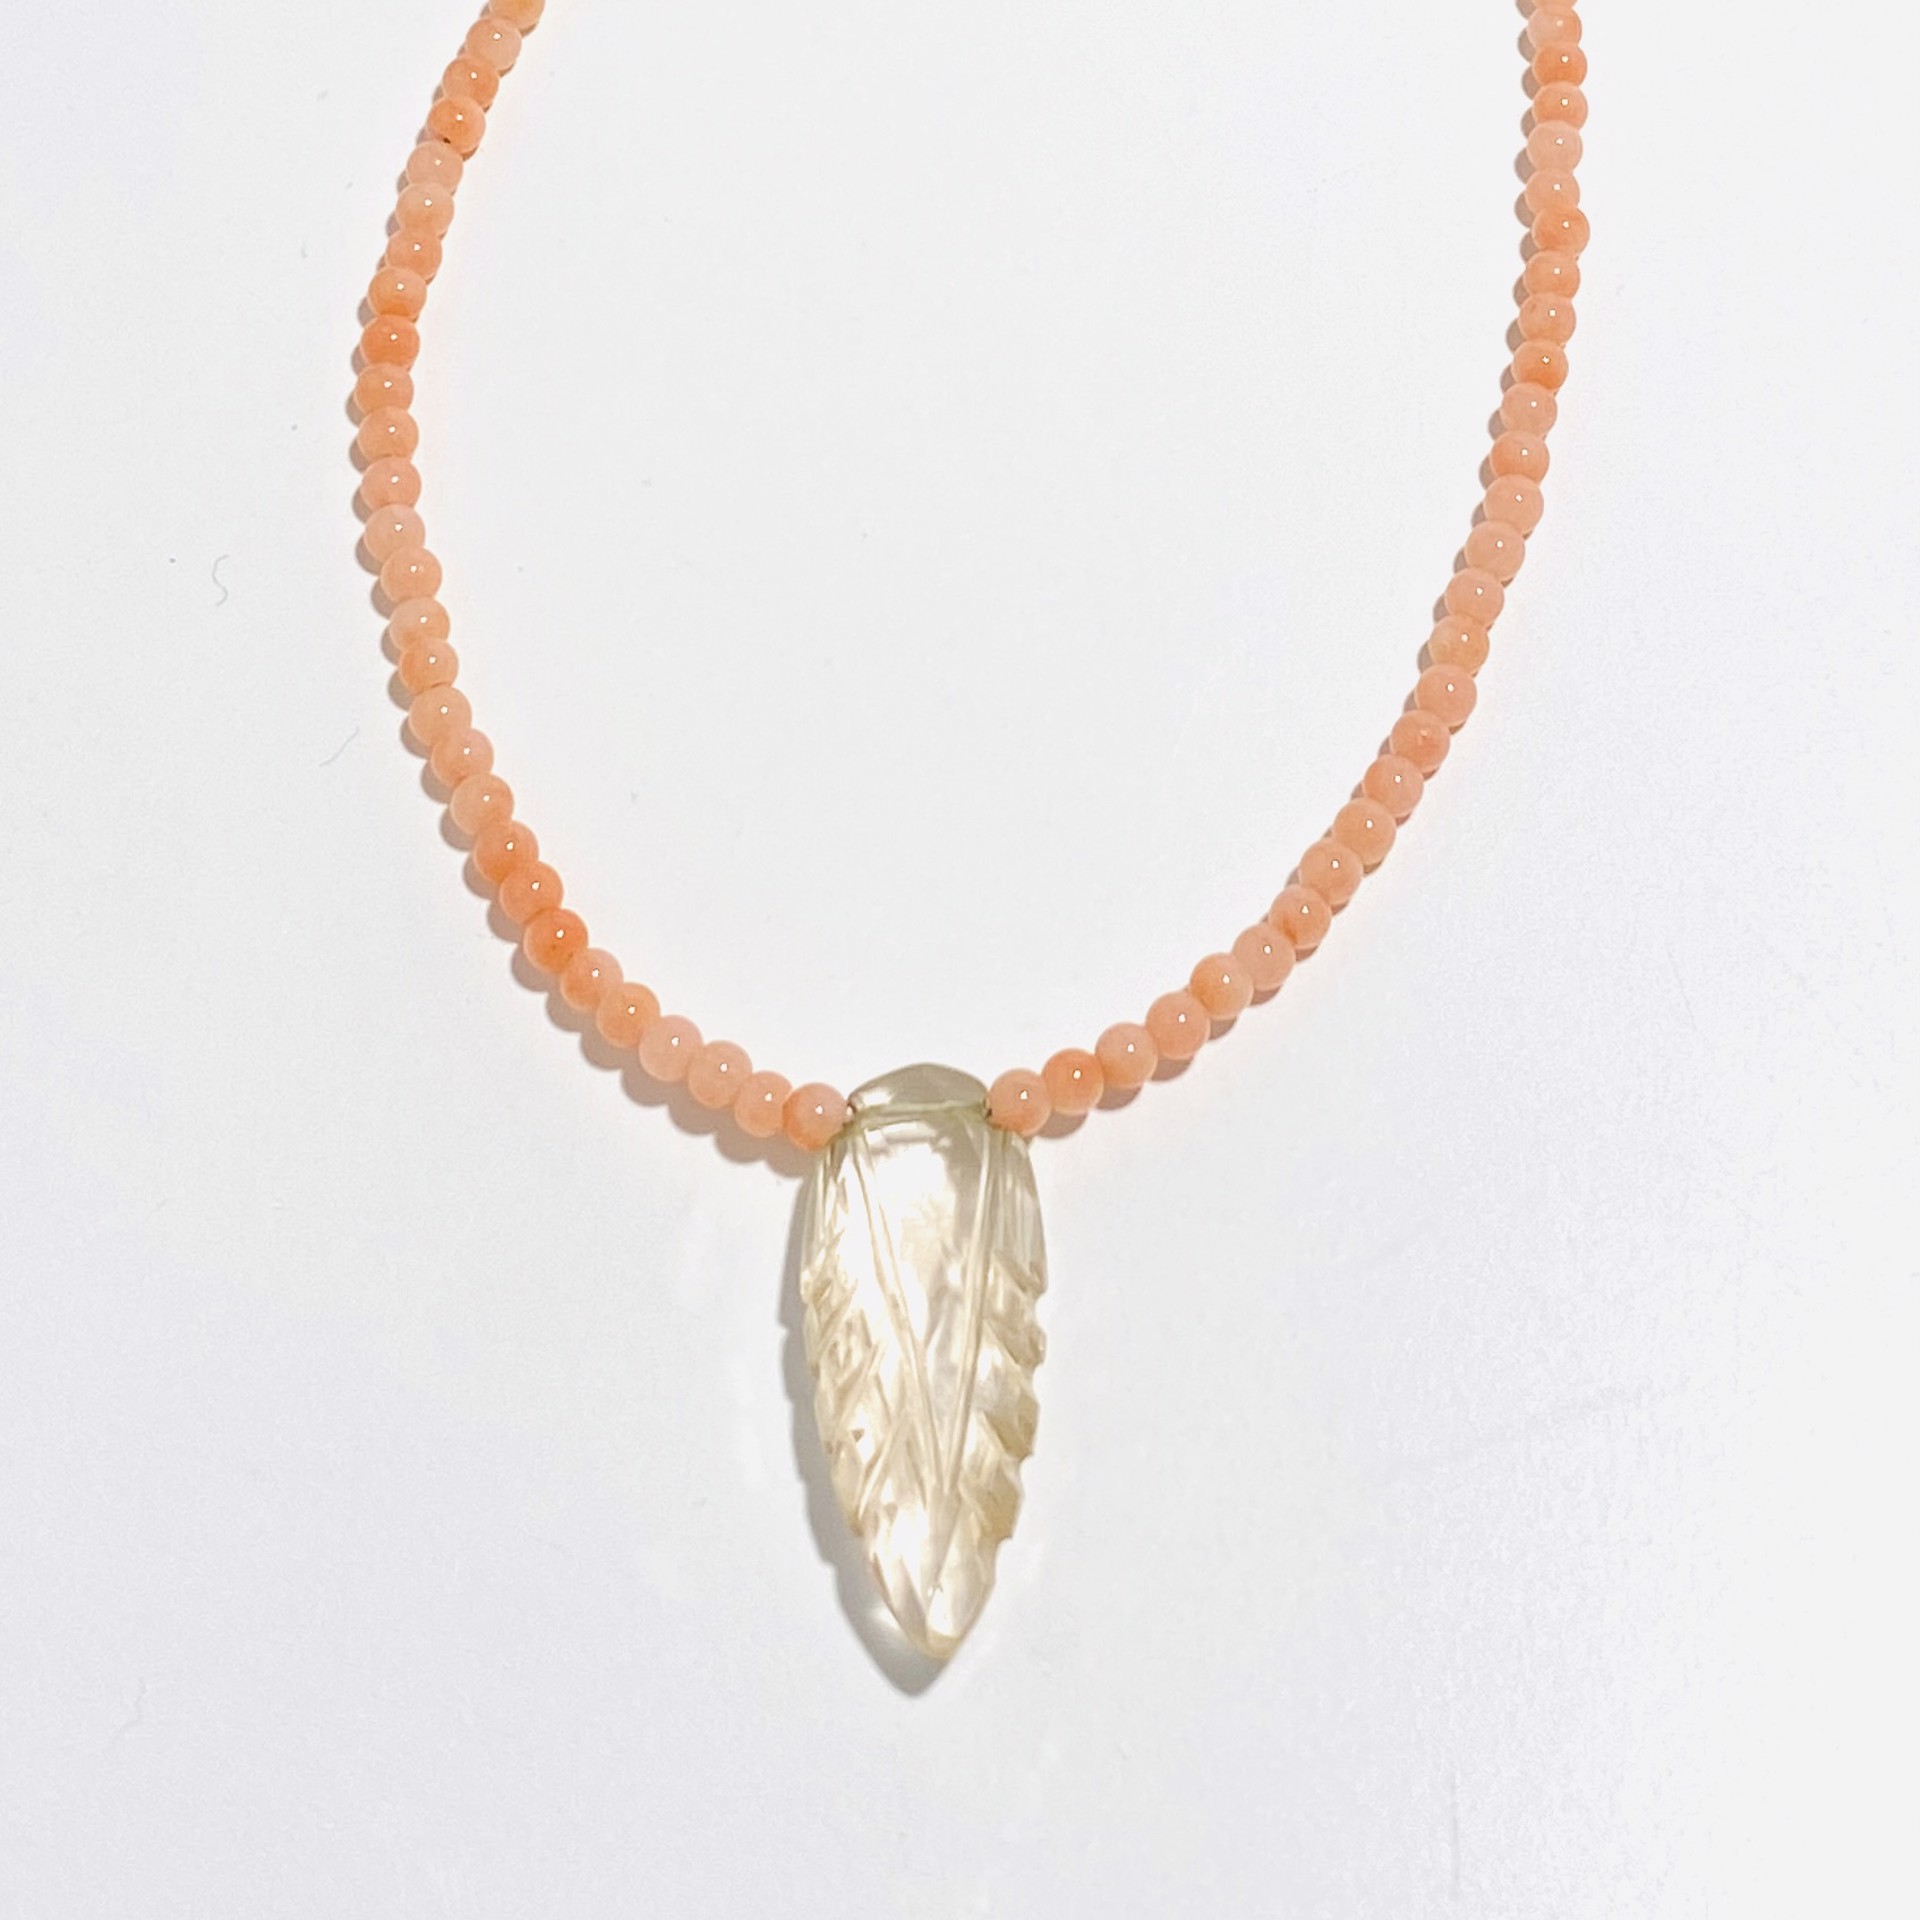 Tiny Round Coral Bead Carved Quartz Focal Necklace by Nance Trueworthy